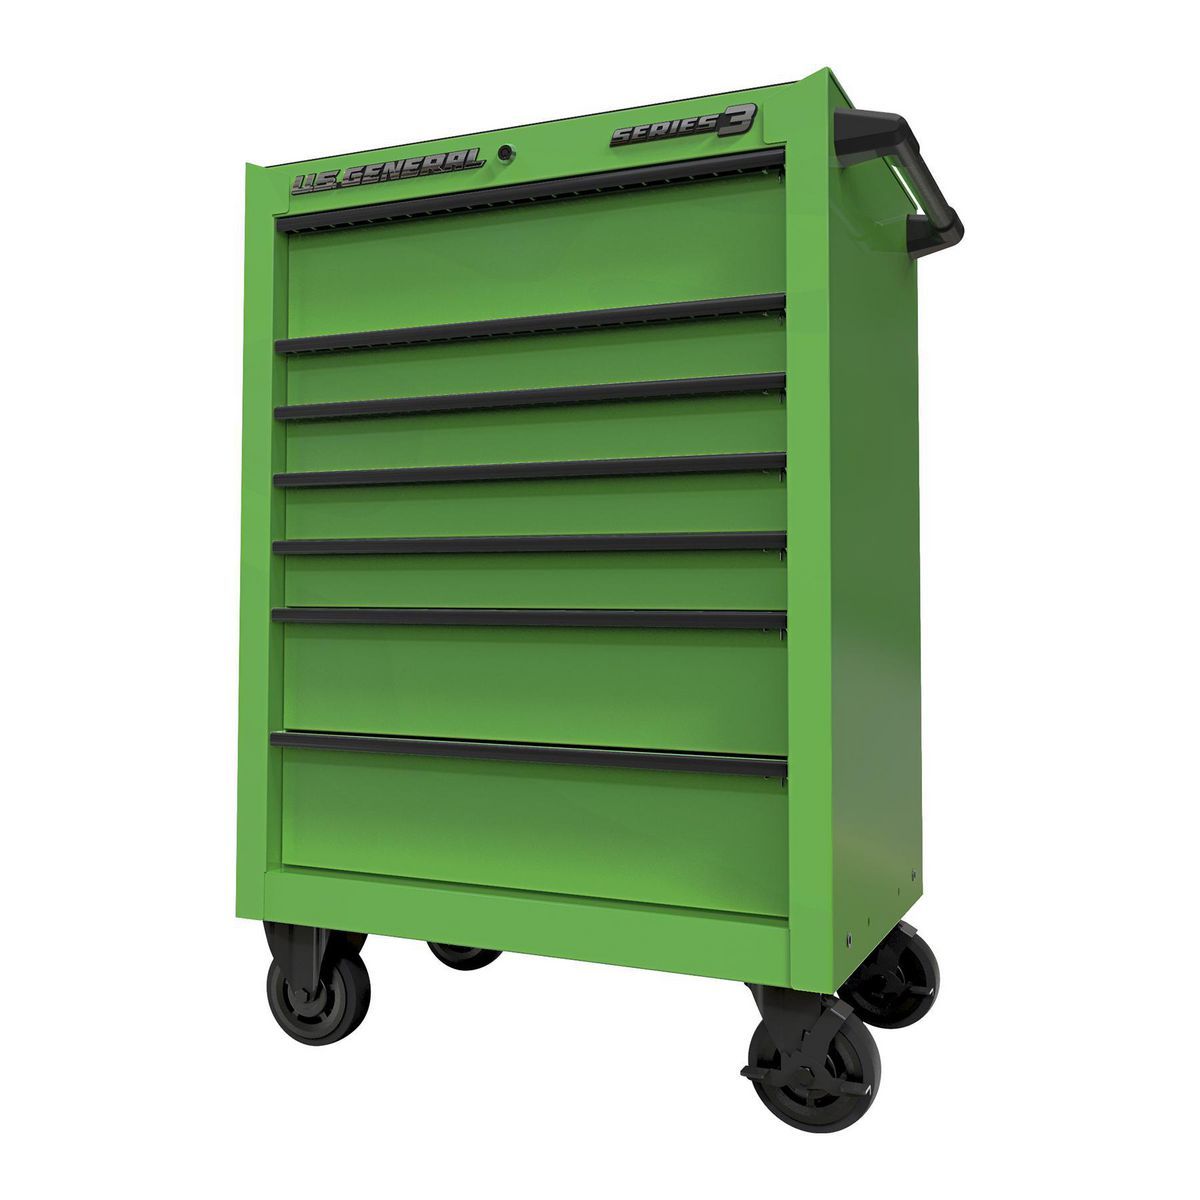 27 in. x 22 in. Roll Cab, Series 3, Green